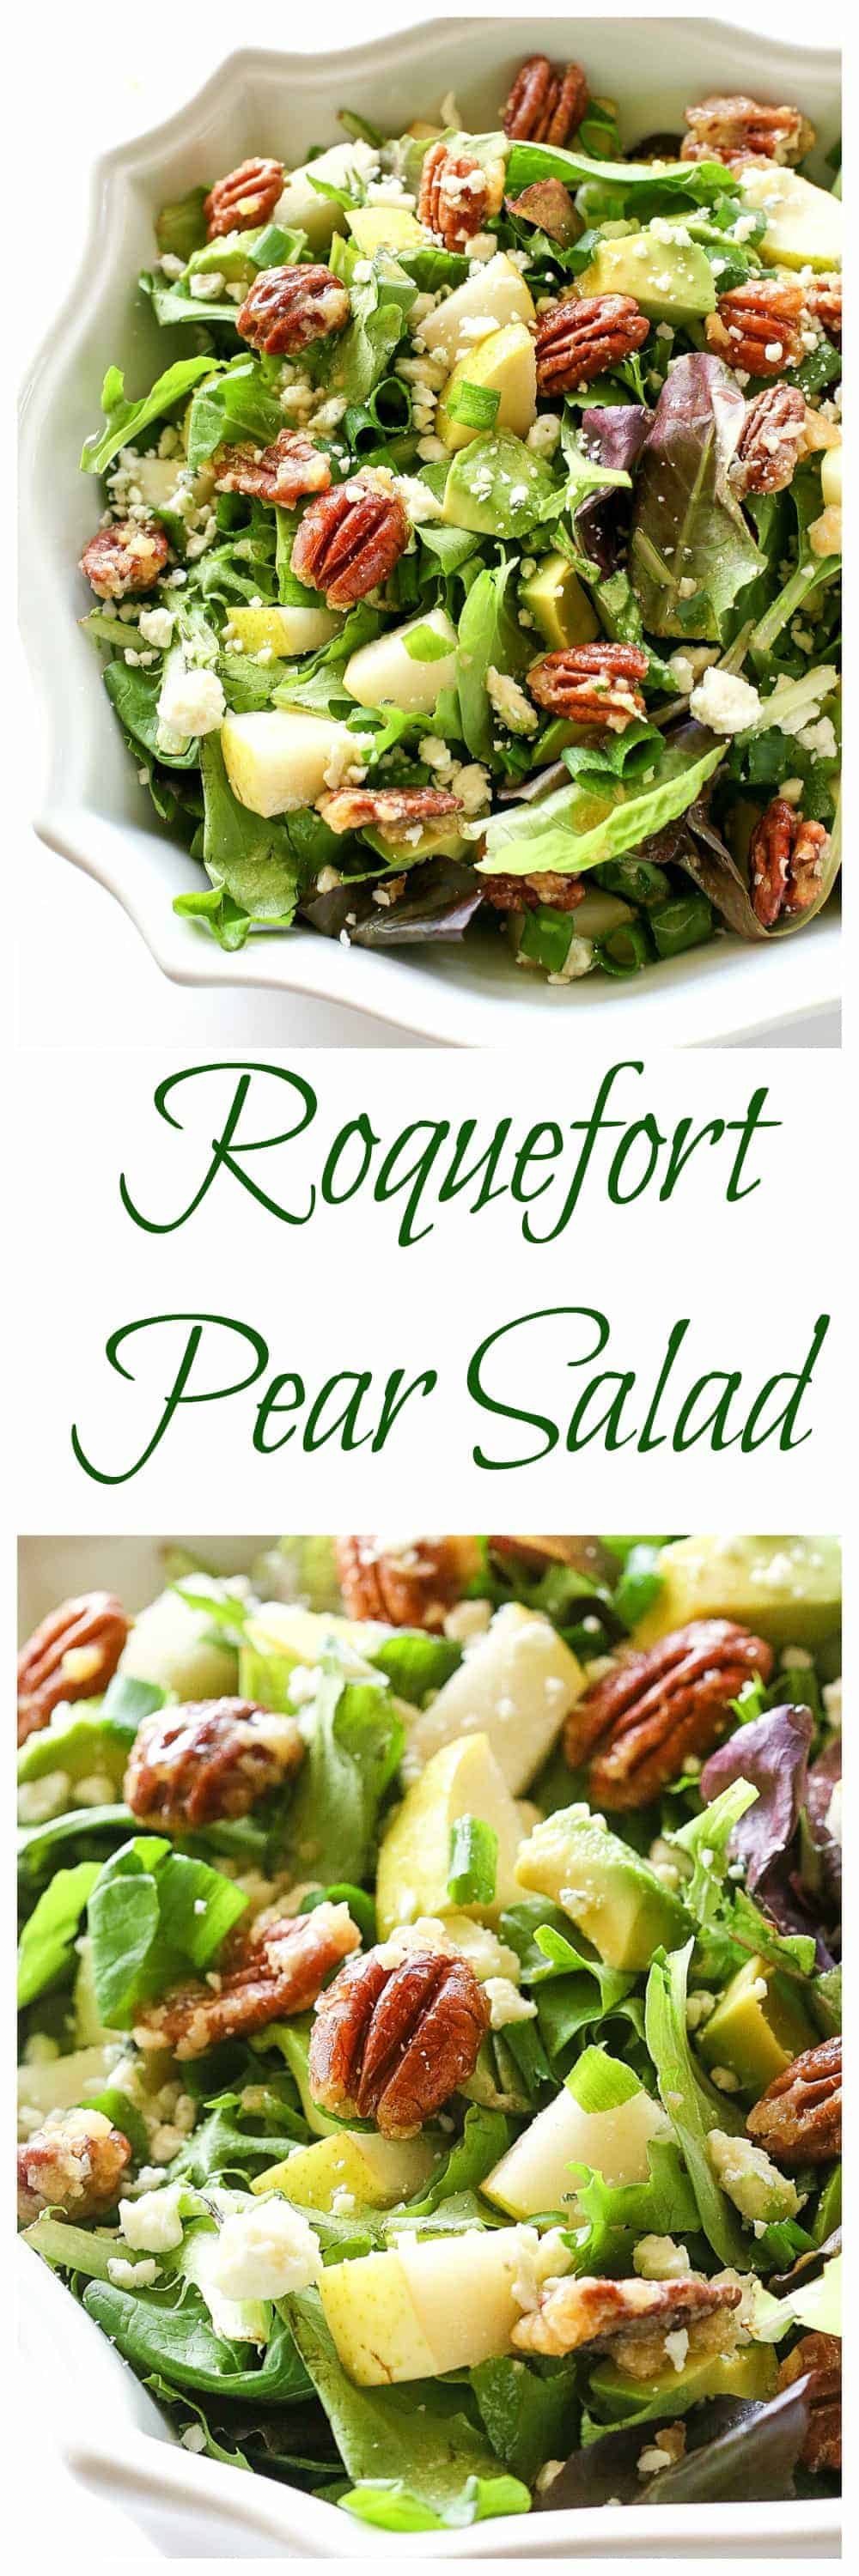 Roquefort Pear Salad - The Girl Who Ate Everything